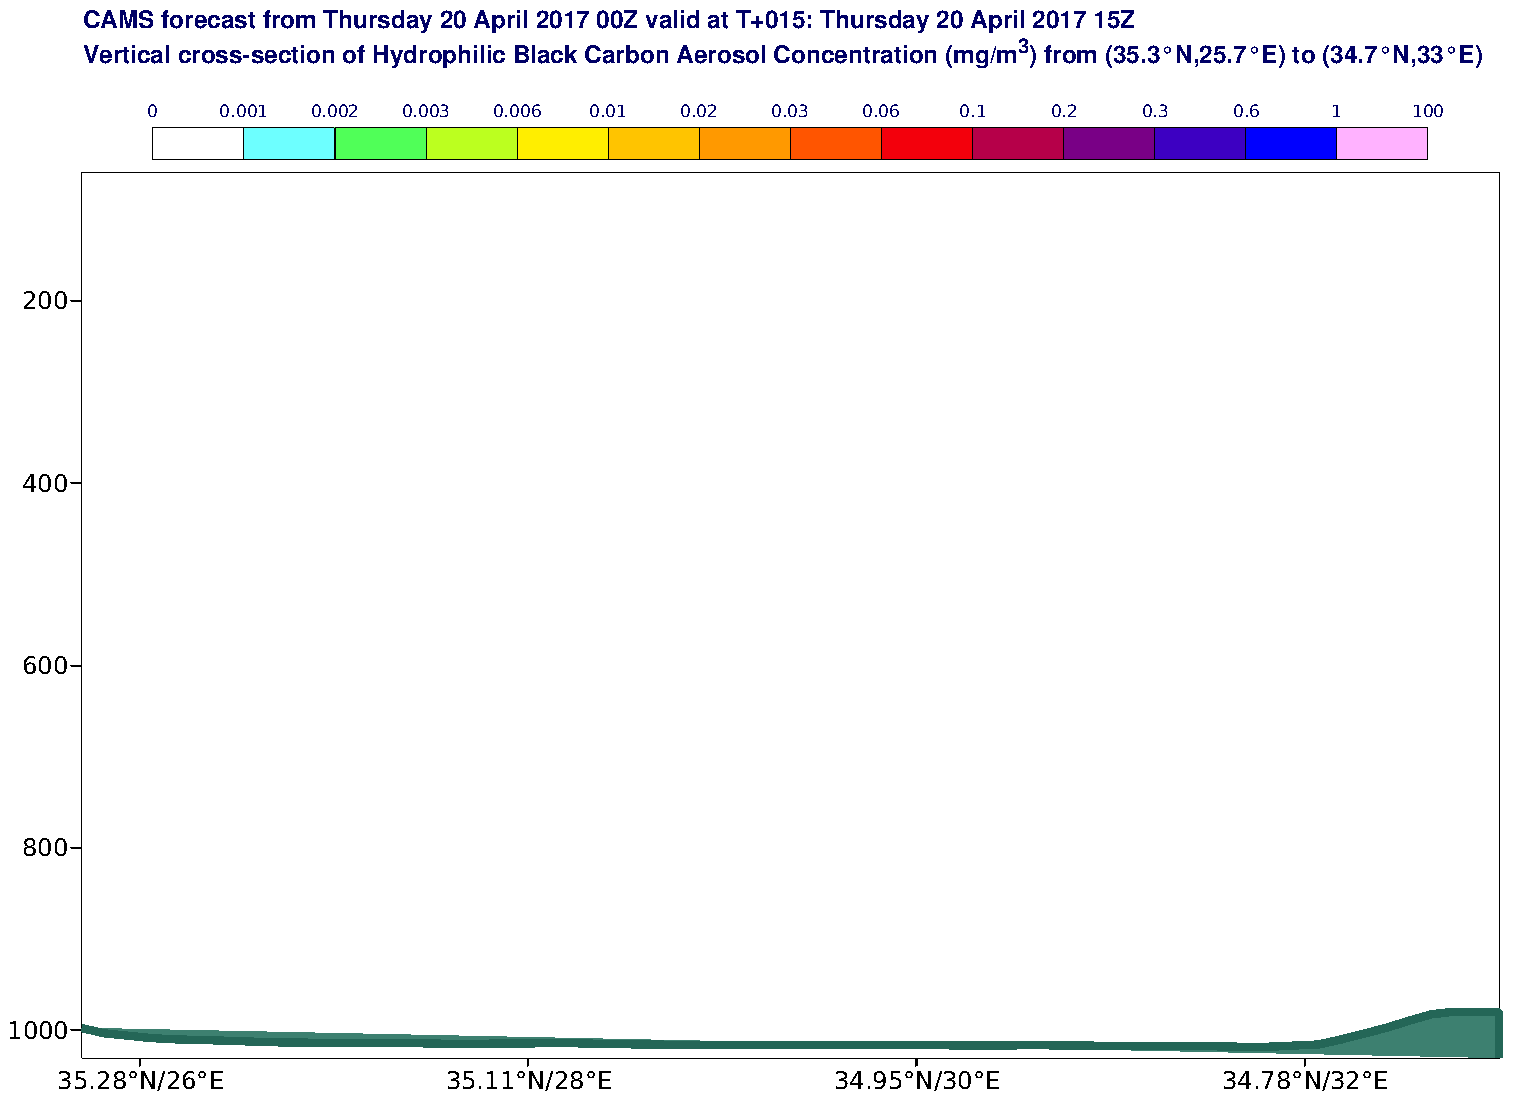 Vertical cross-section of Hydrophilic Black Carbon Aerosol Concentration (mg/m3) valid at T15 - 2017-04-20 15:00